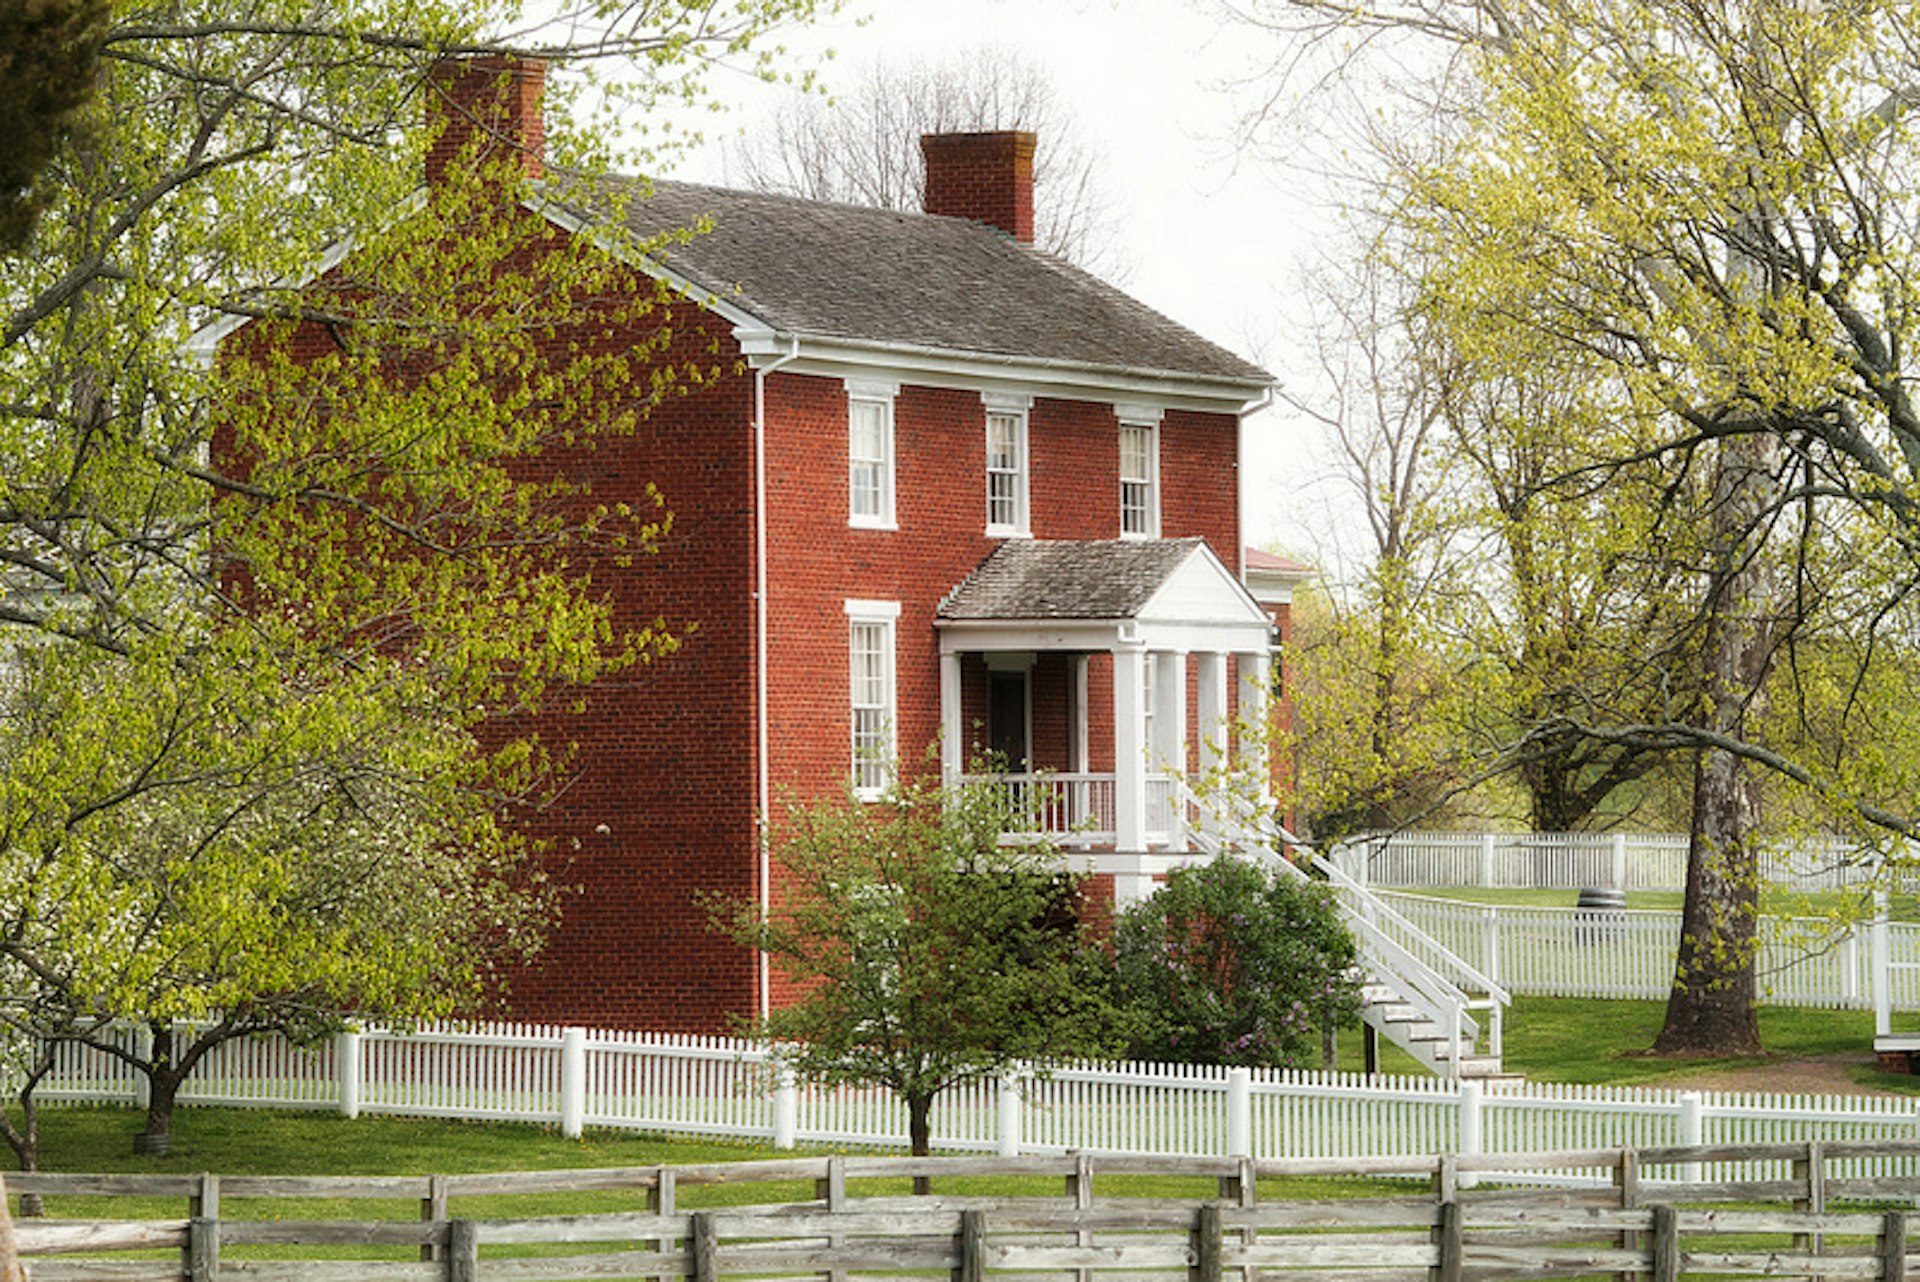 The McClean House at Appomattox Court House. Photo by Rob Shenk / CC BY-SA 2.0